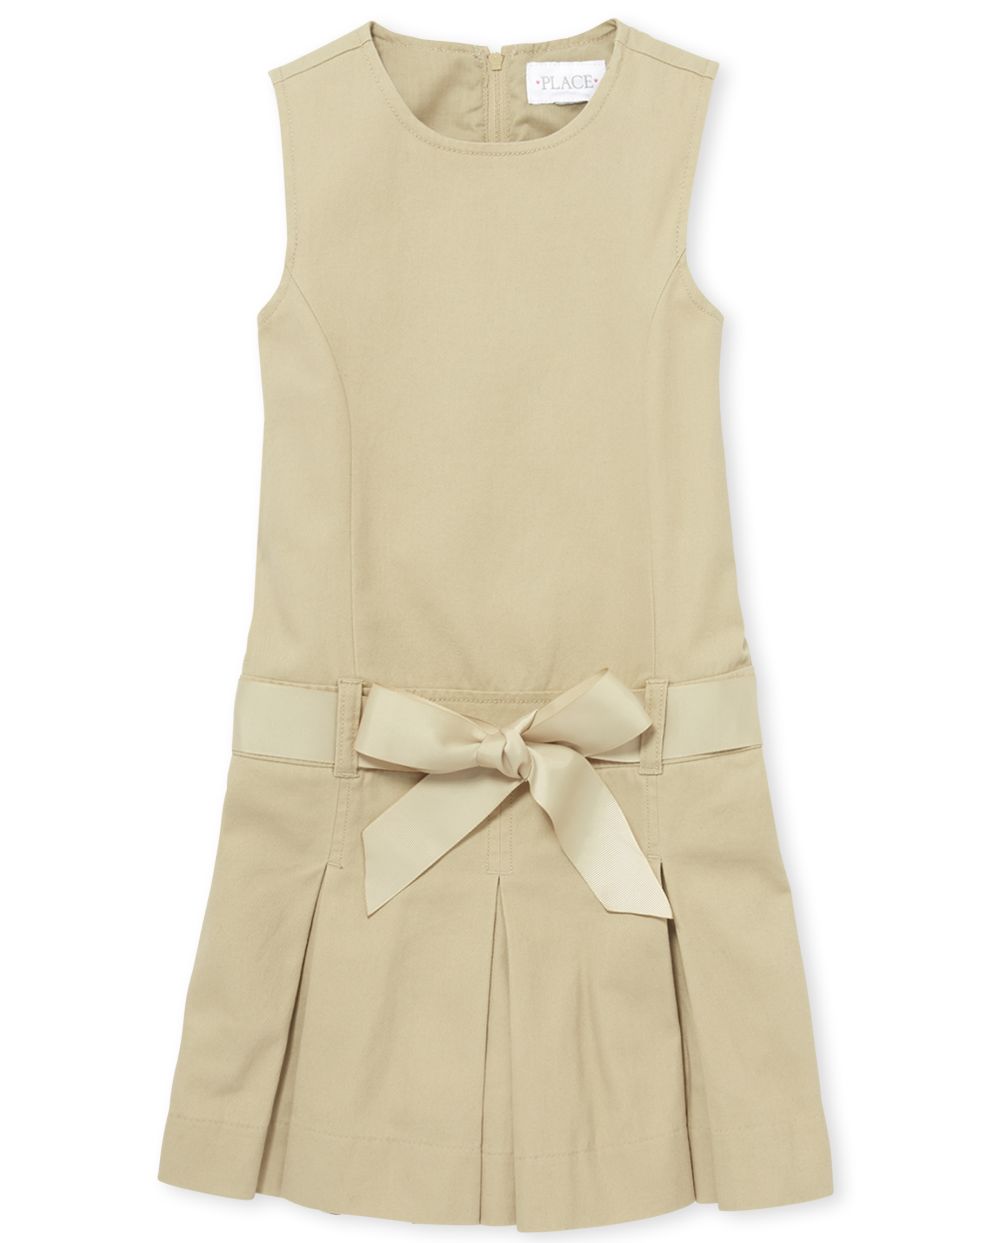 Girls Round Neck Sleeveless Above the Knee Back Zipper Belted Self Tie Pleated Jumper With a Ribbon